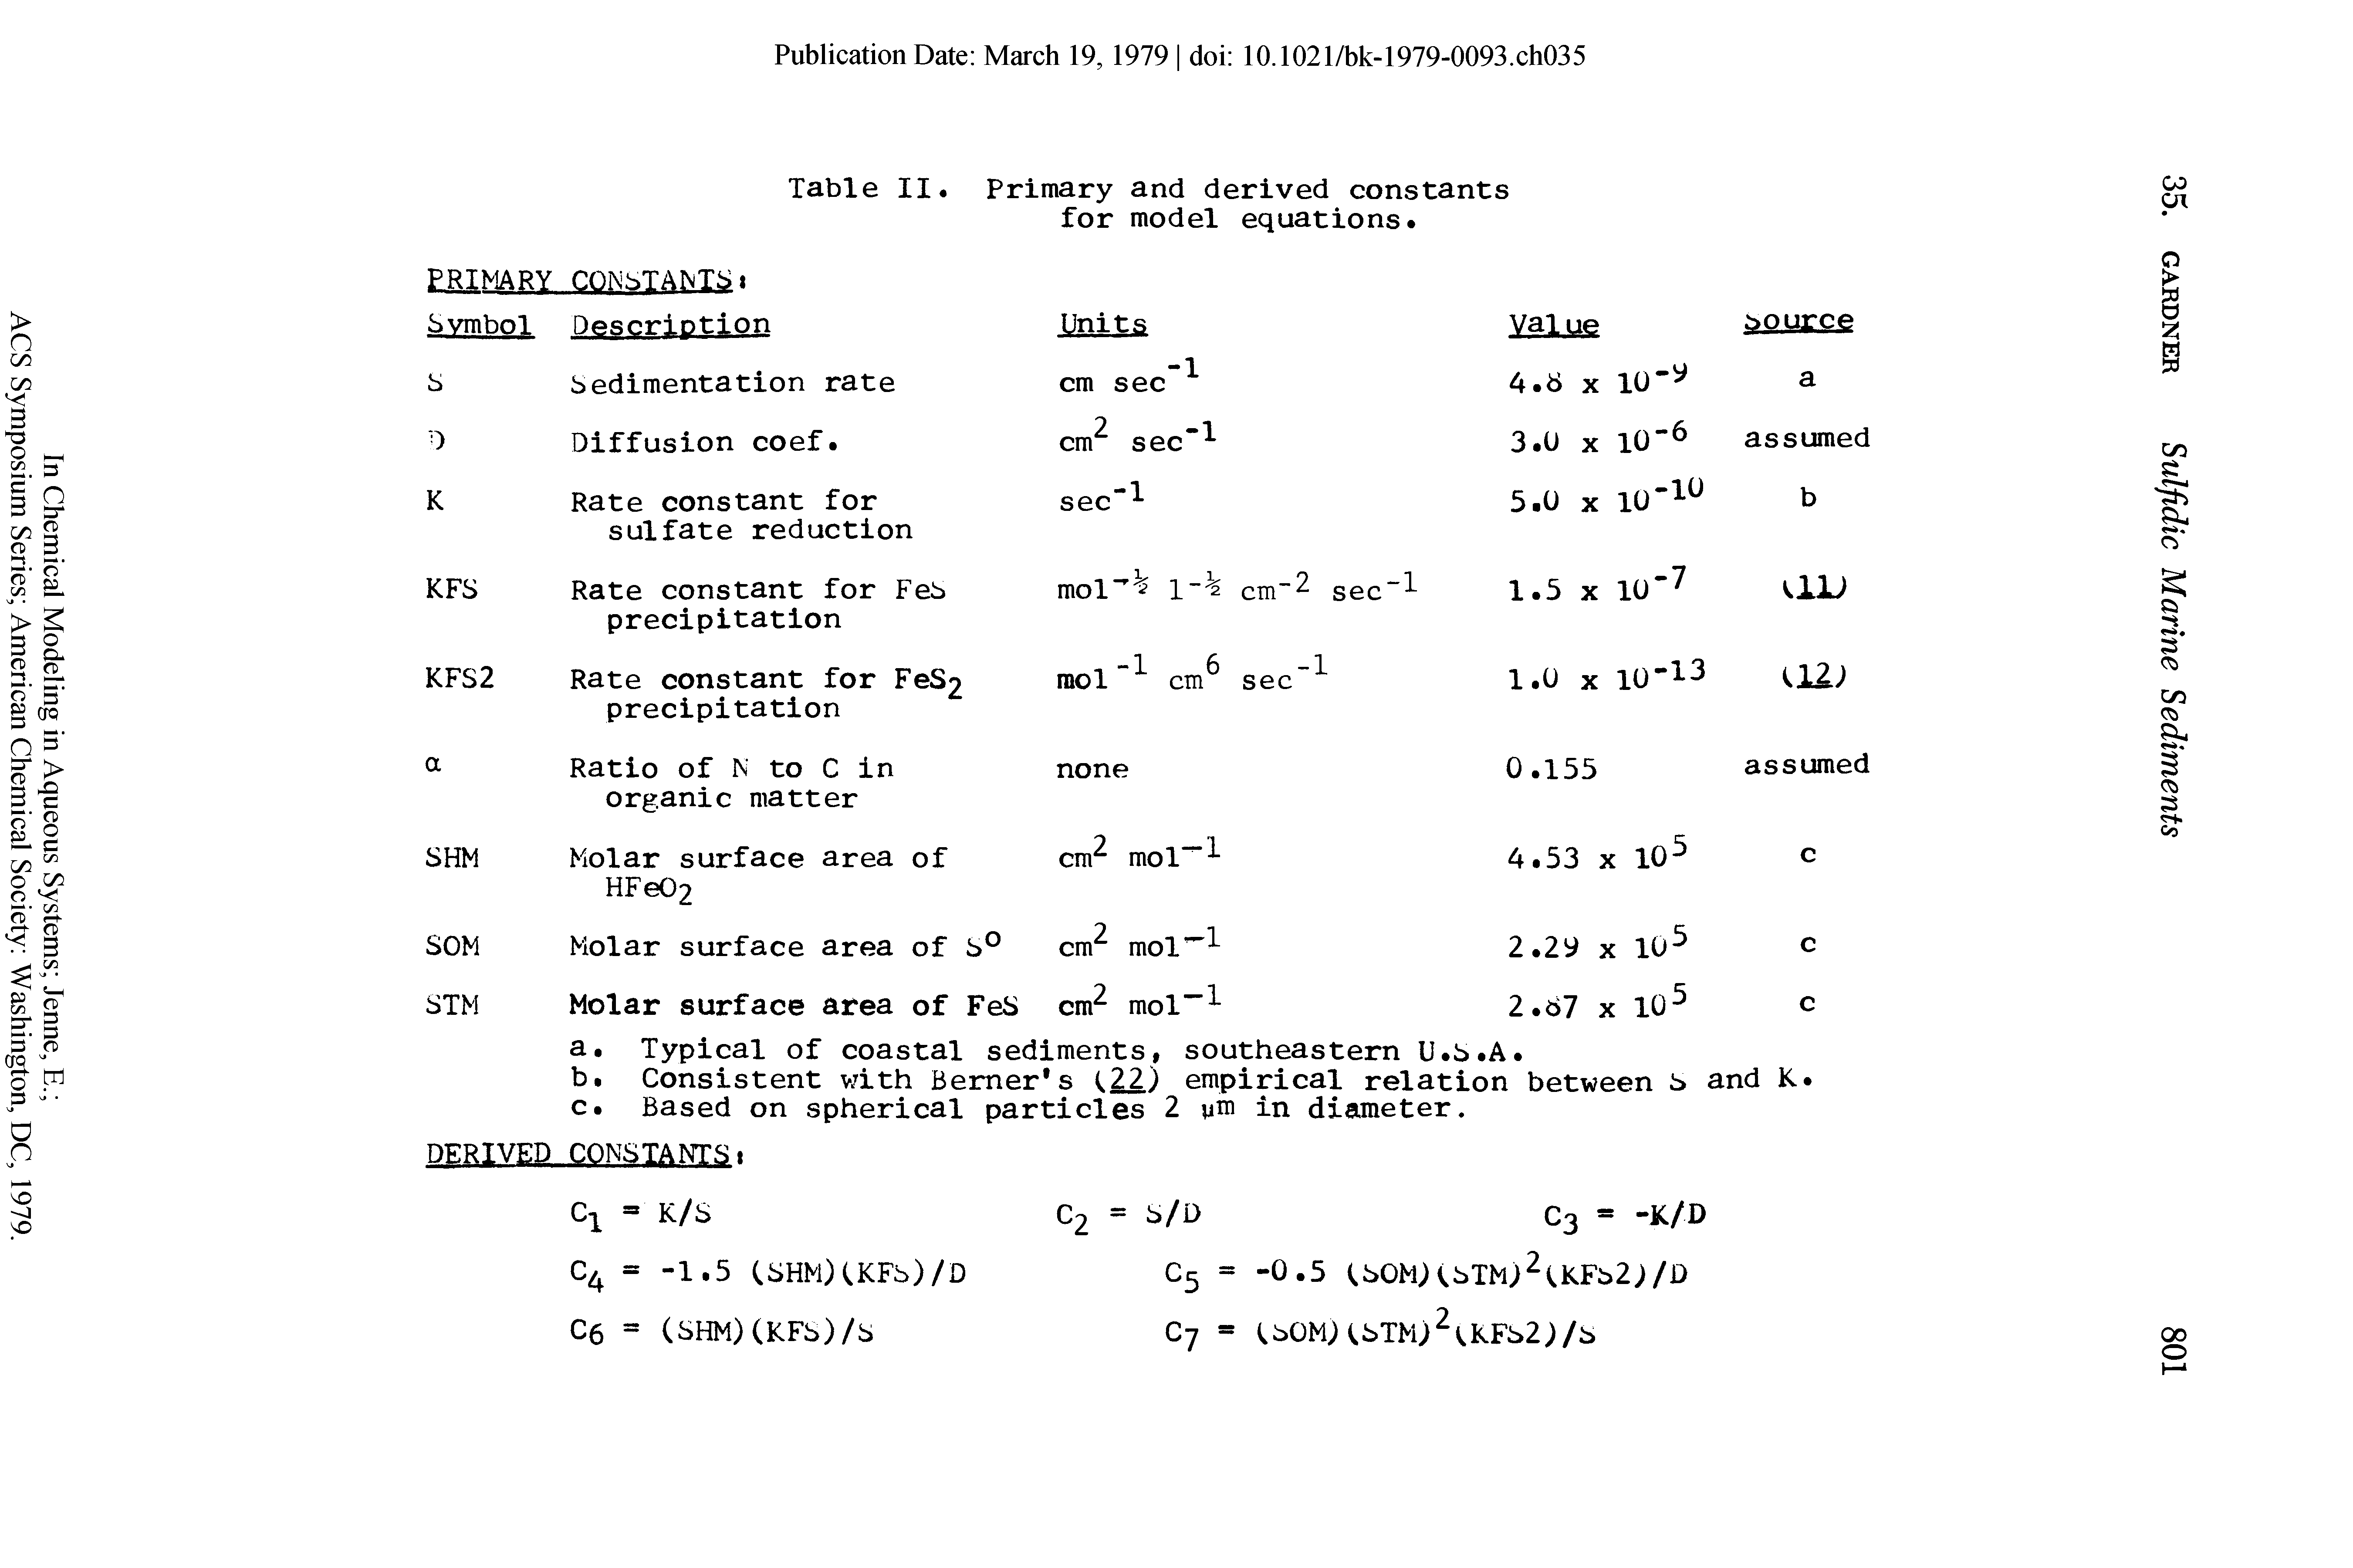 Table II Primary and derived constants for model equations.